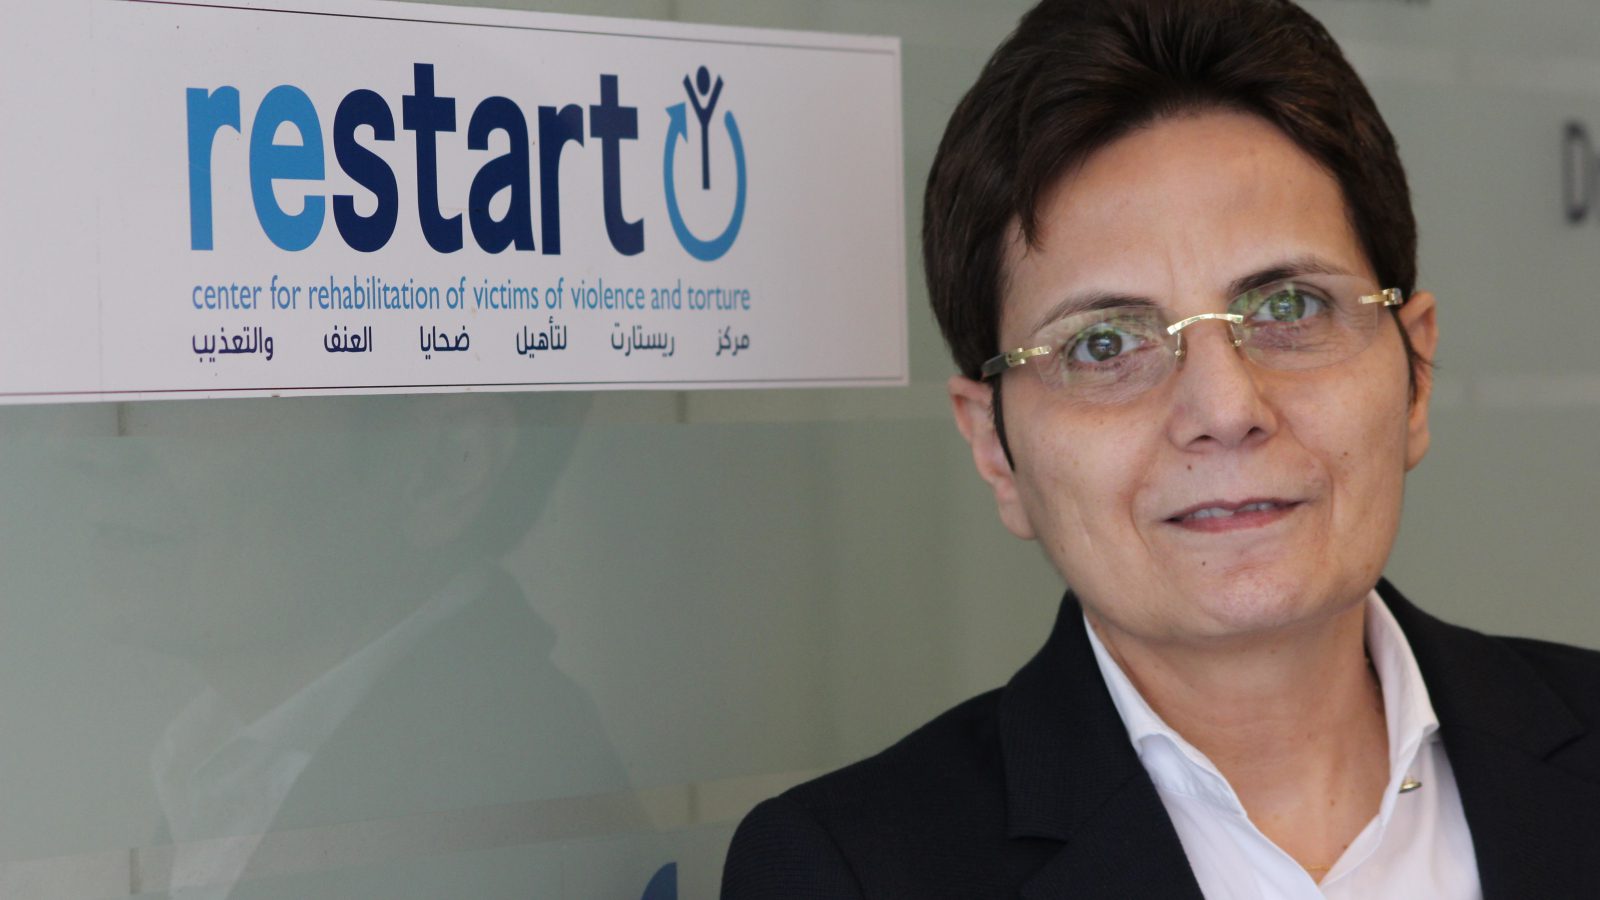 Suzanne Jabbour, founder of Restart, an NGO fighting for the prevention of torture, many of whose projects are funded by the European Union